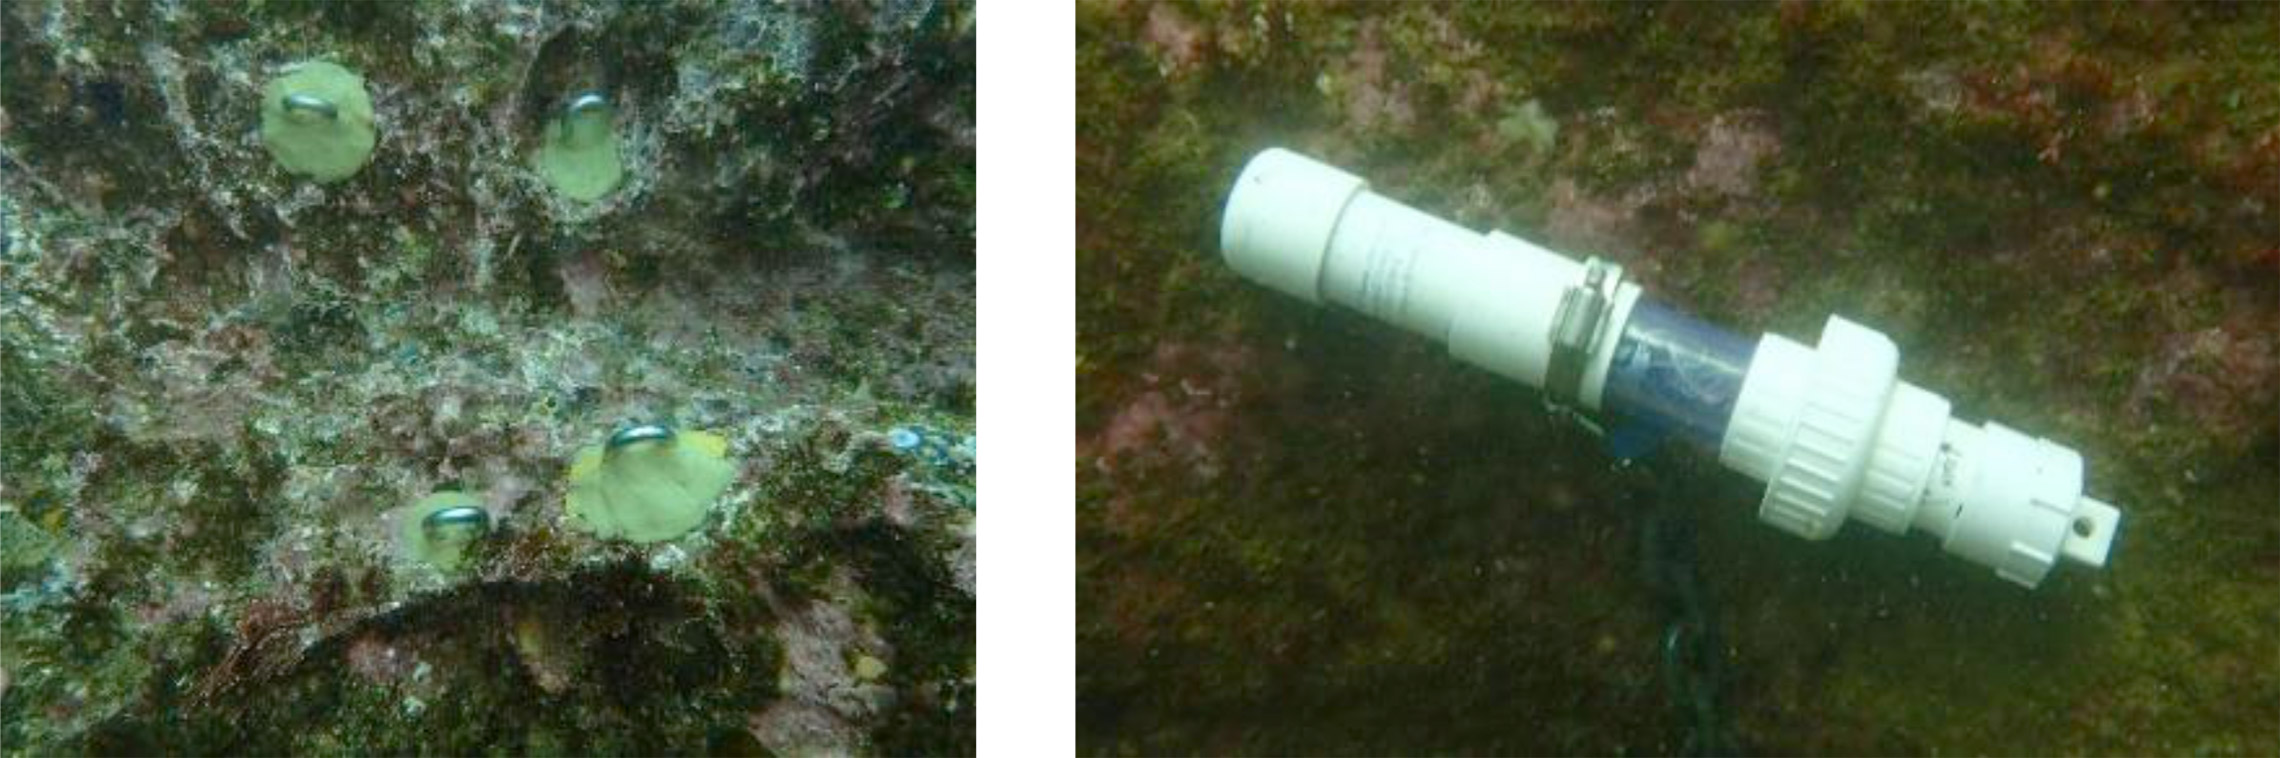 Figure 37: Left: Stainless steel eye bolts epoxied into holes drilled in a rocky reef. Right: OWHL secured to an eye bolt using a stainless steel band clamp.
(Photo credit: The Bay Foundation)